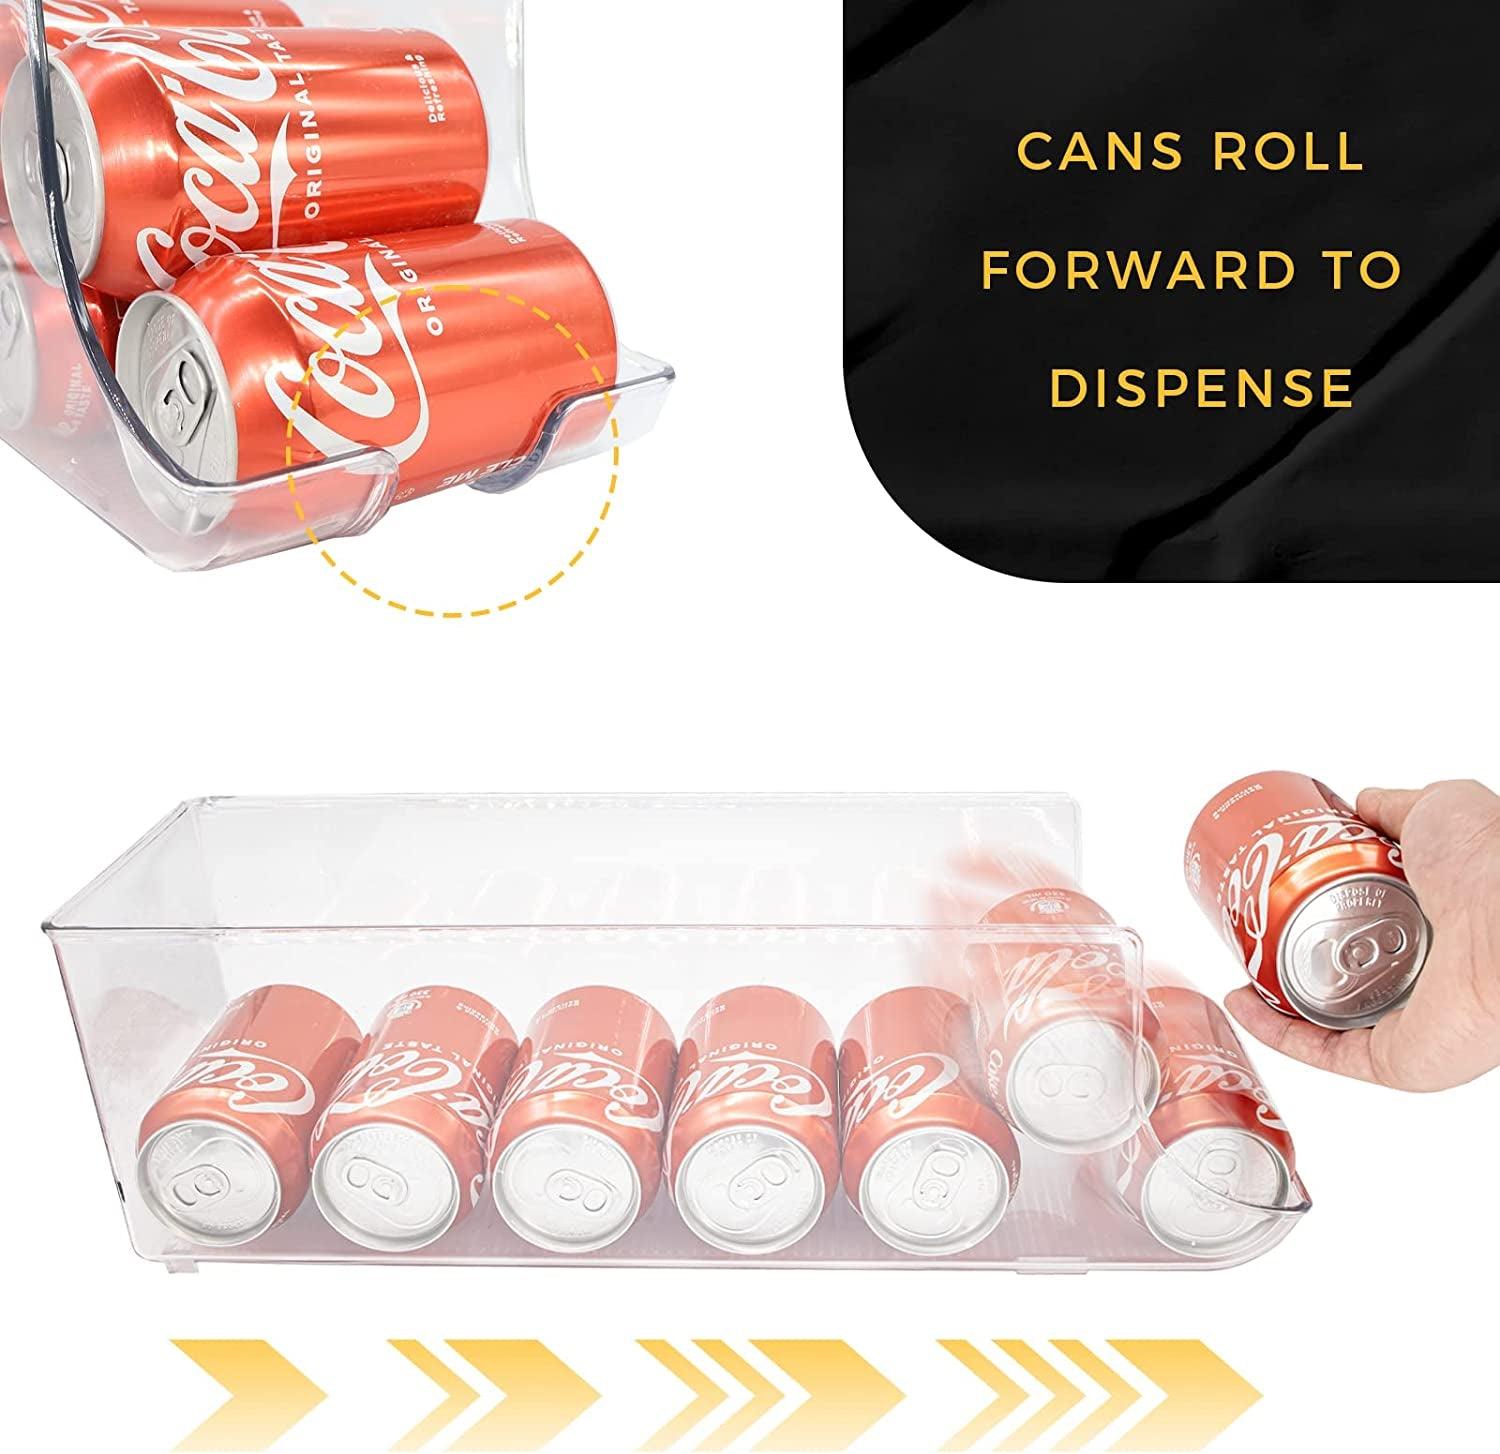 2 Pack Soda Can Organizer for Refrigerator, Stackable Canned Food Pop Cans Container Can Holder Dispenser with Lid for Fridge Pantry Rack Freezer, Clear Plastic Storage Bins-Holds 12 Cans Each